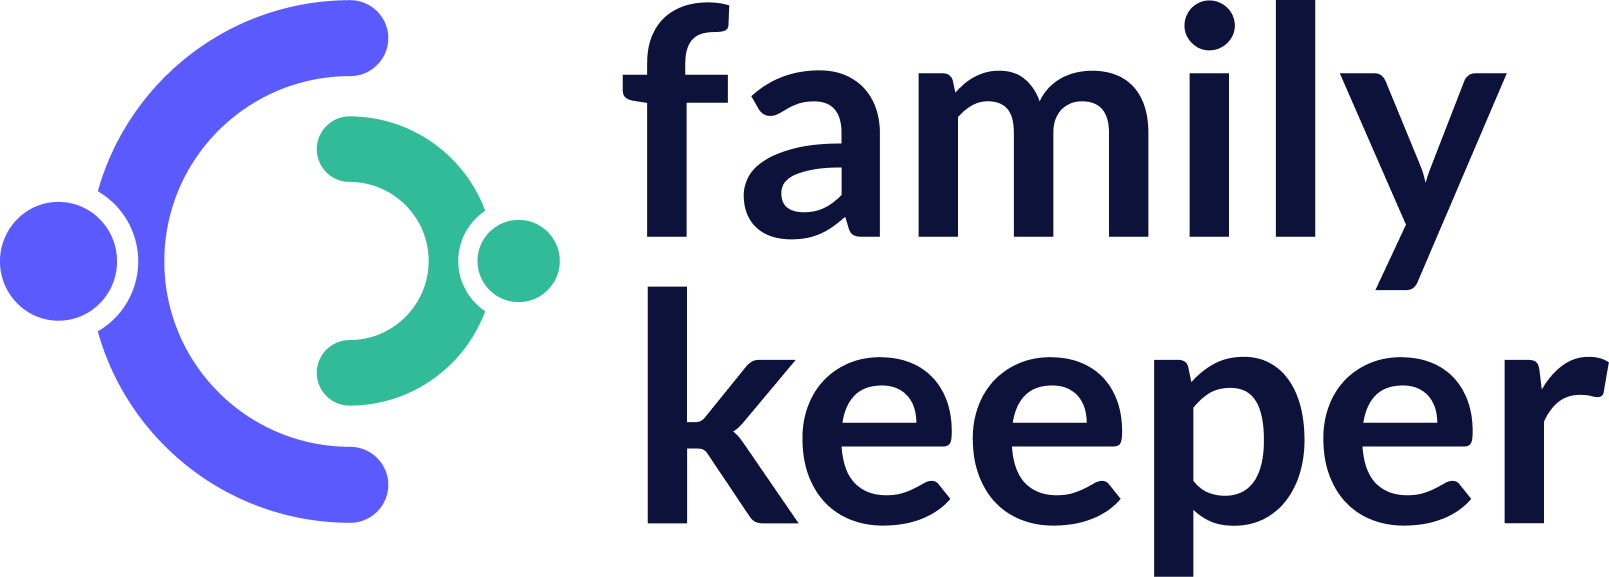 Compare FamilyKeeper With Others